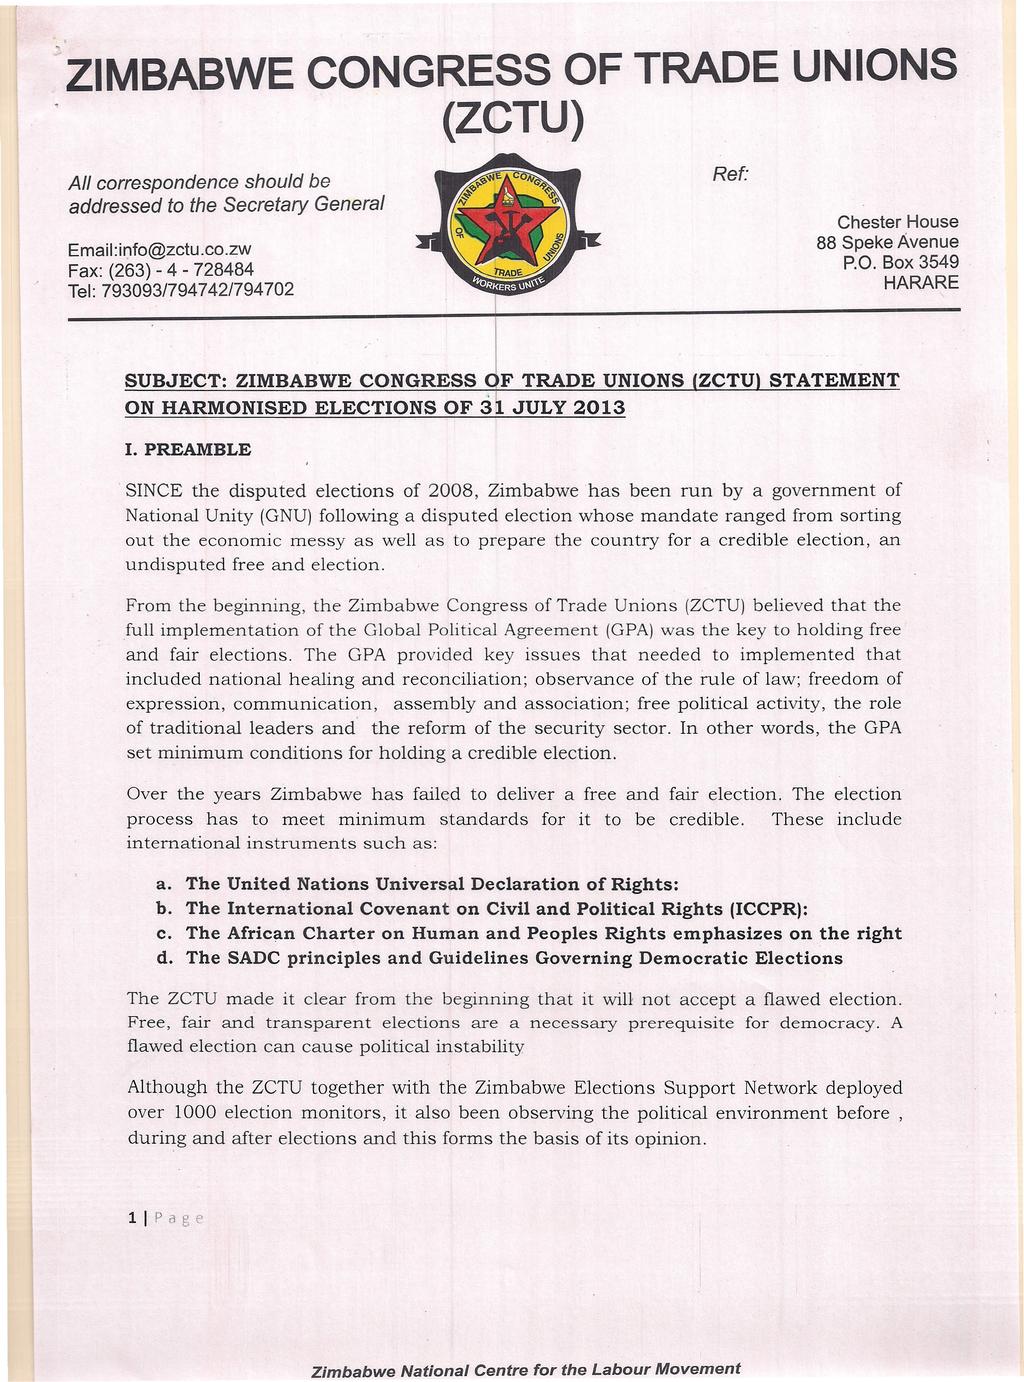 . -ZIMBABWE CONGRESS OF TRADE UNIONS (ZCTU) All correspondence should be addressed to the Secretary General Email:info@zctu.co.zw Fax: (263) - 4-728484 Tel: 793093/794742/794702 Ref: Chester House 88 Speke Avenue p.